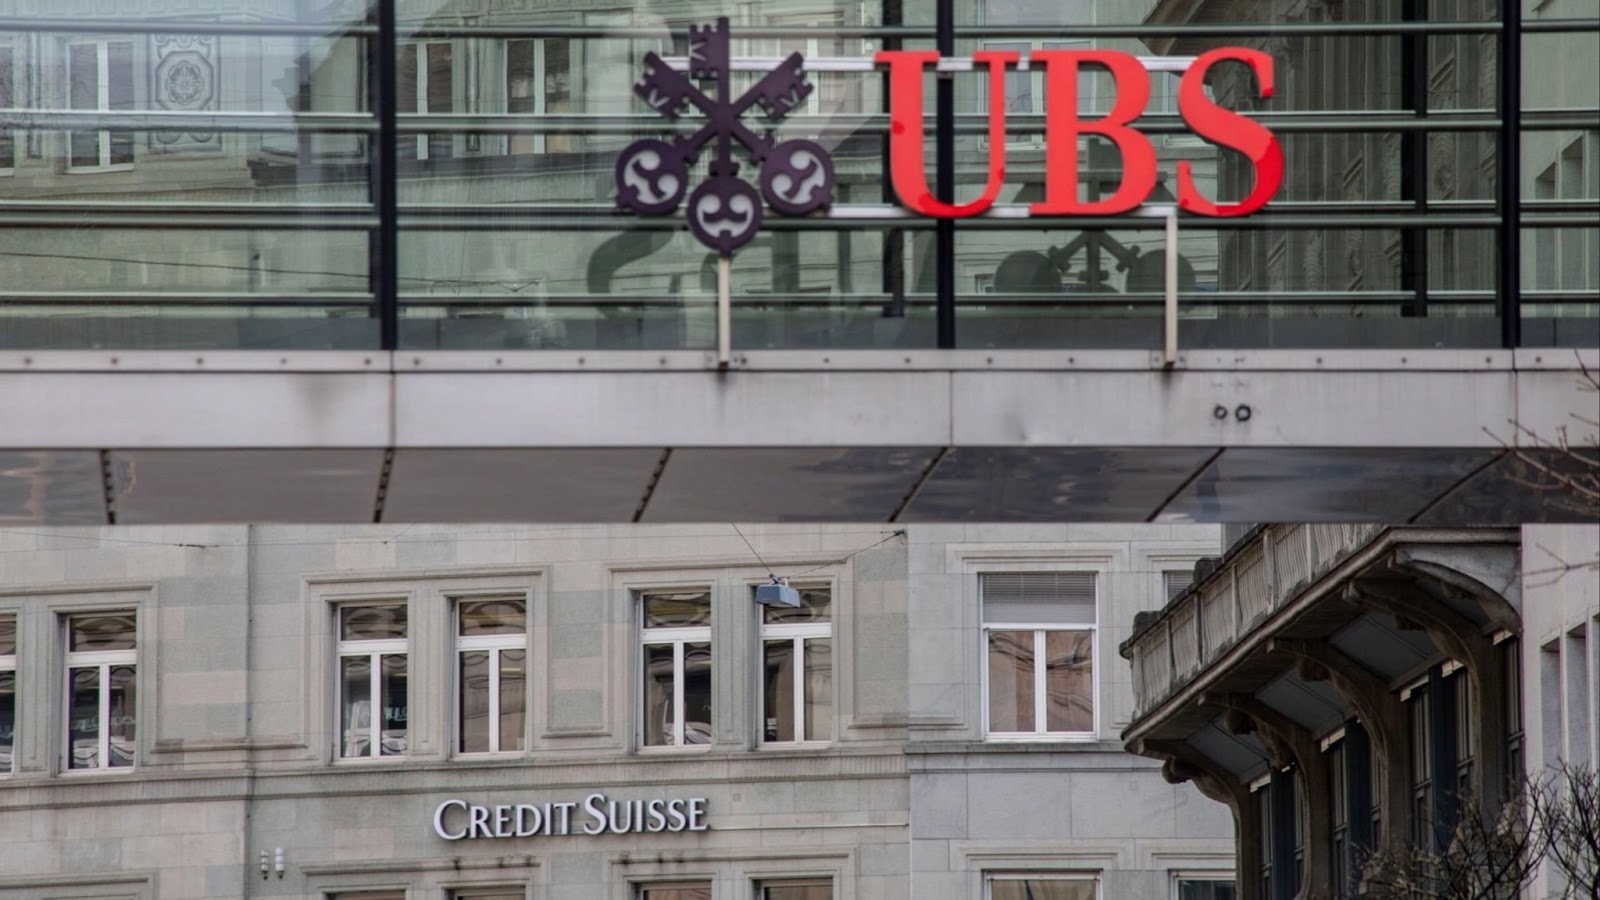 Less than 20% of India’s jobs might be affected by UBS take-over of Credit Suisse - Asiana Times